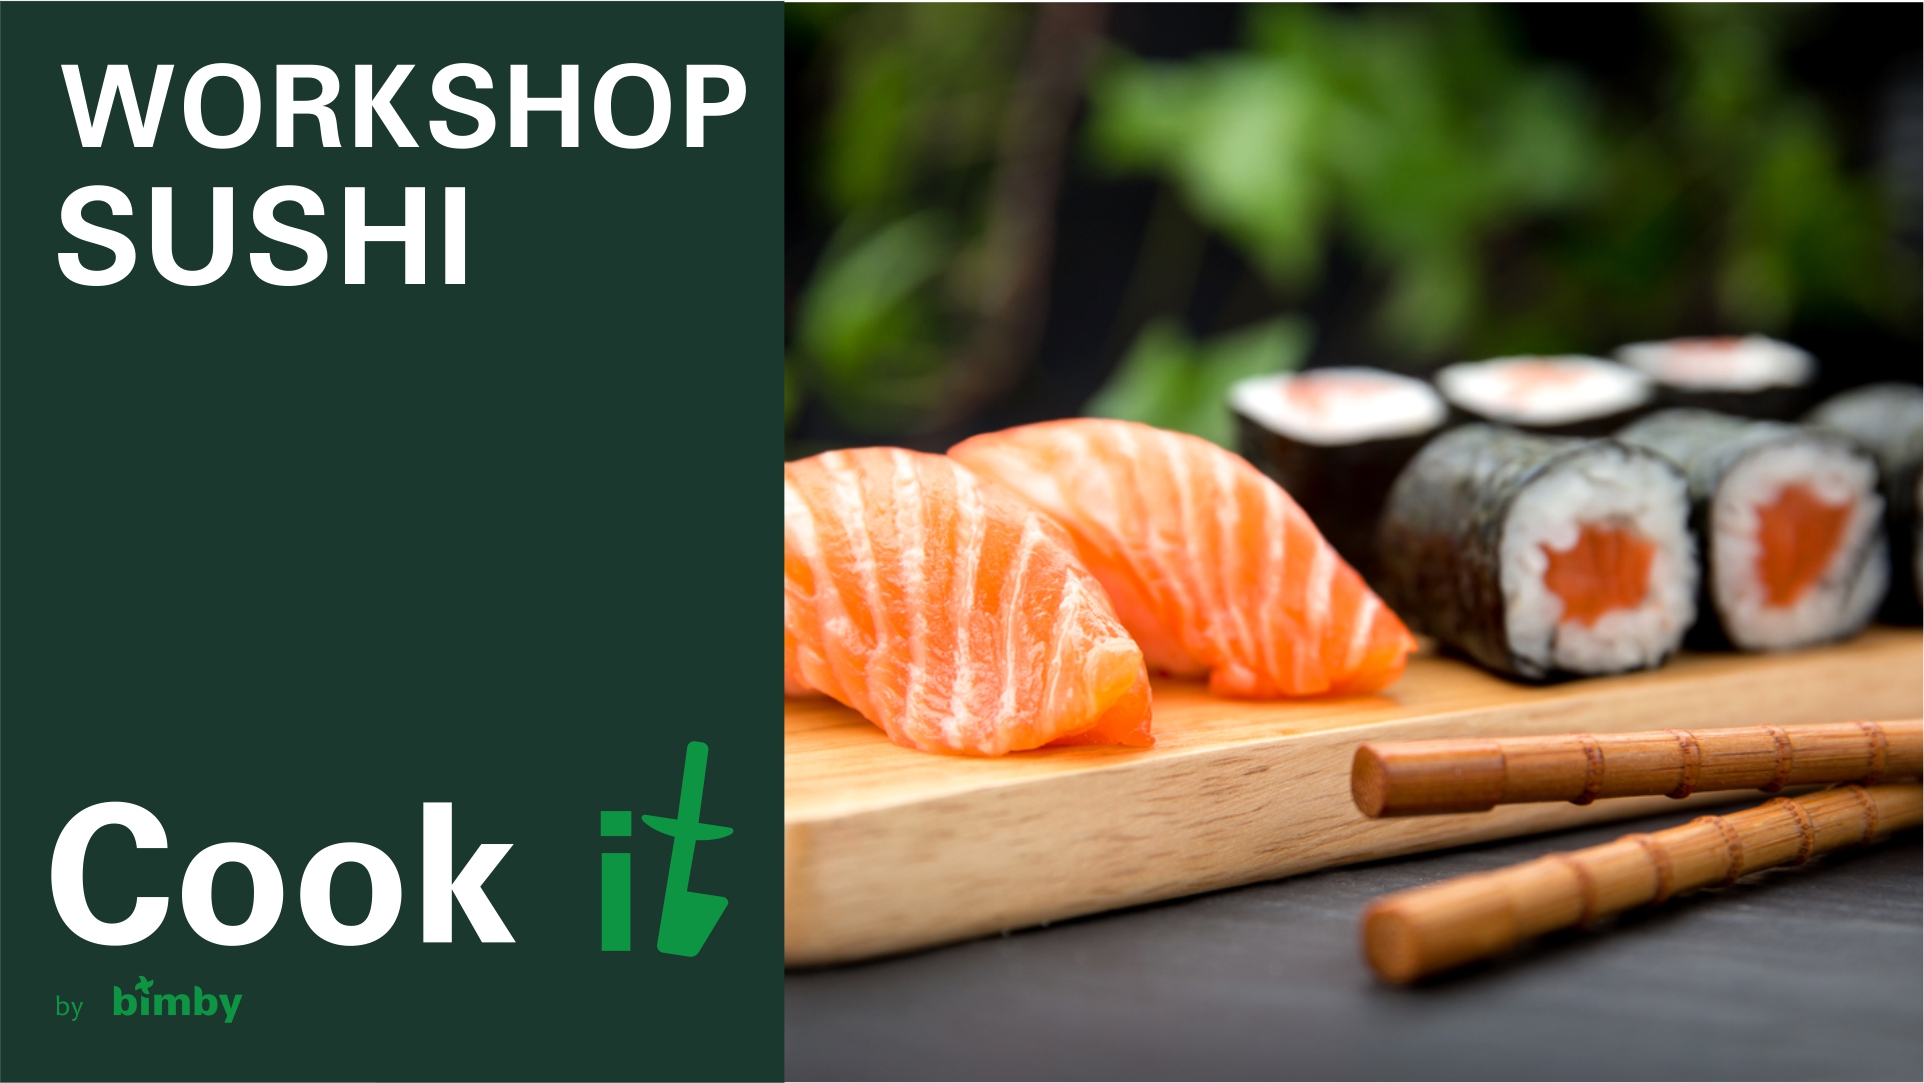 Workshop Cook it by Bimby® | Sushi